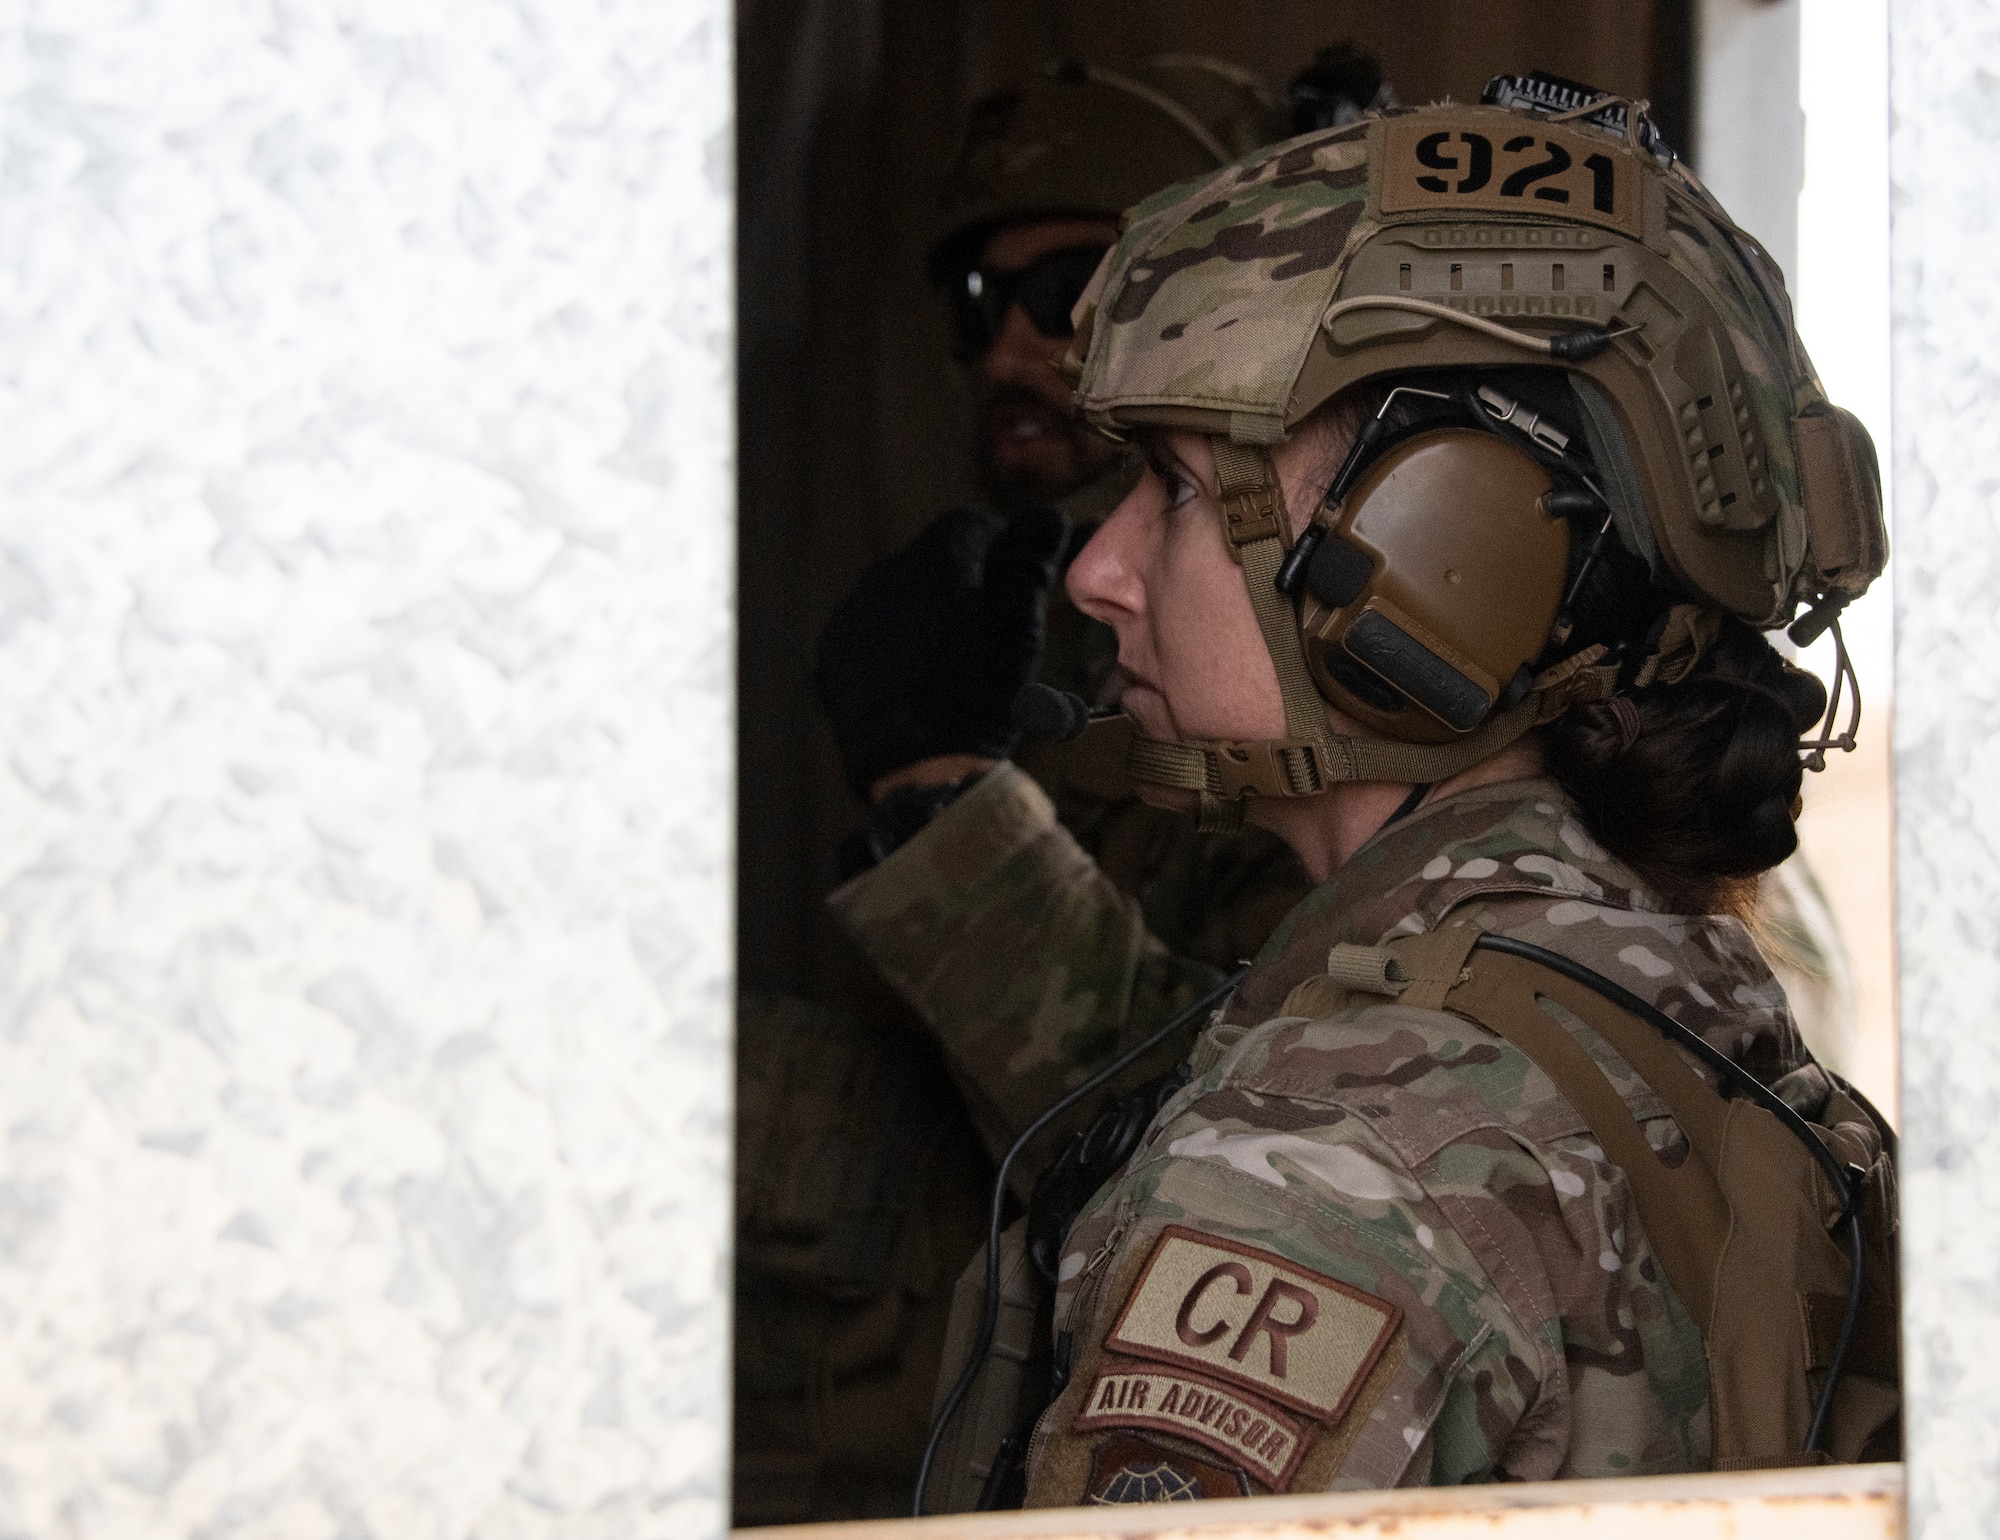 View of Airman wearing a helmet though a window.